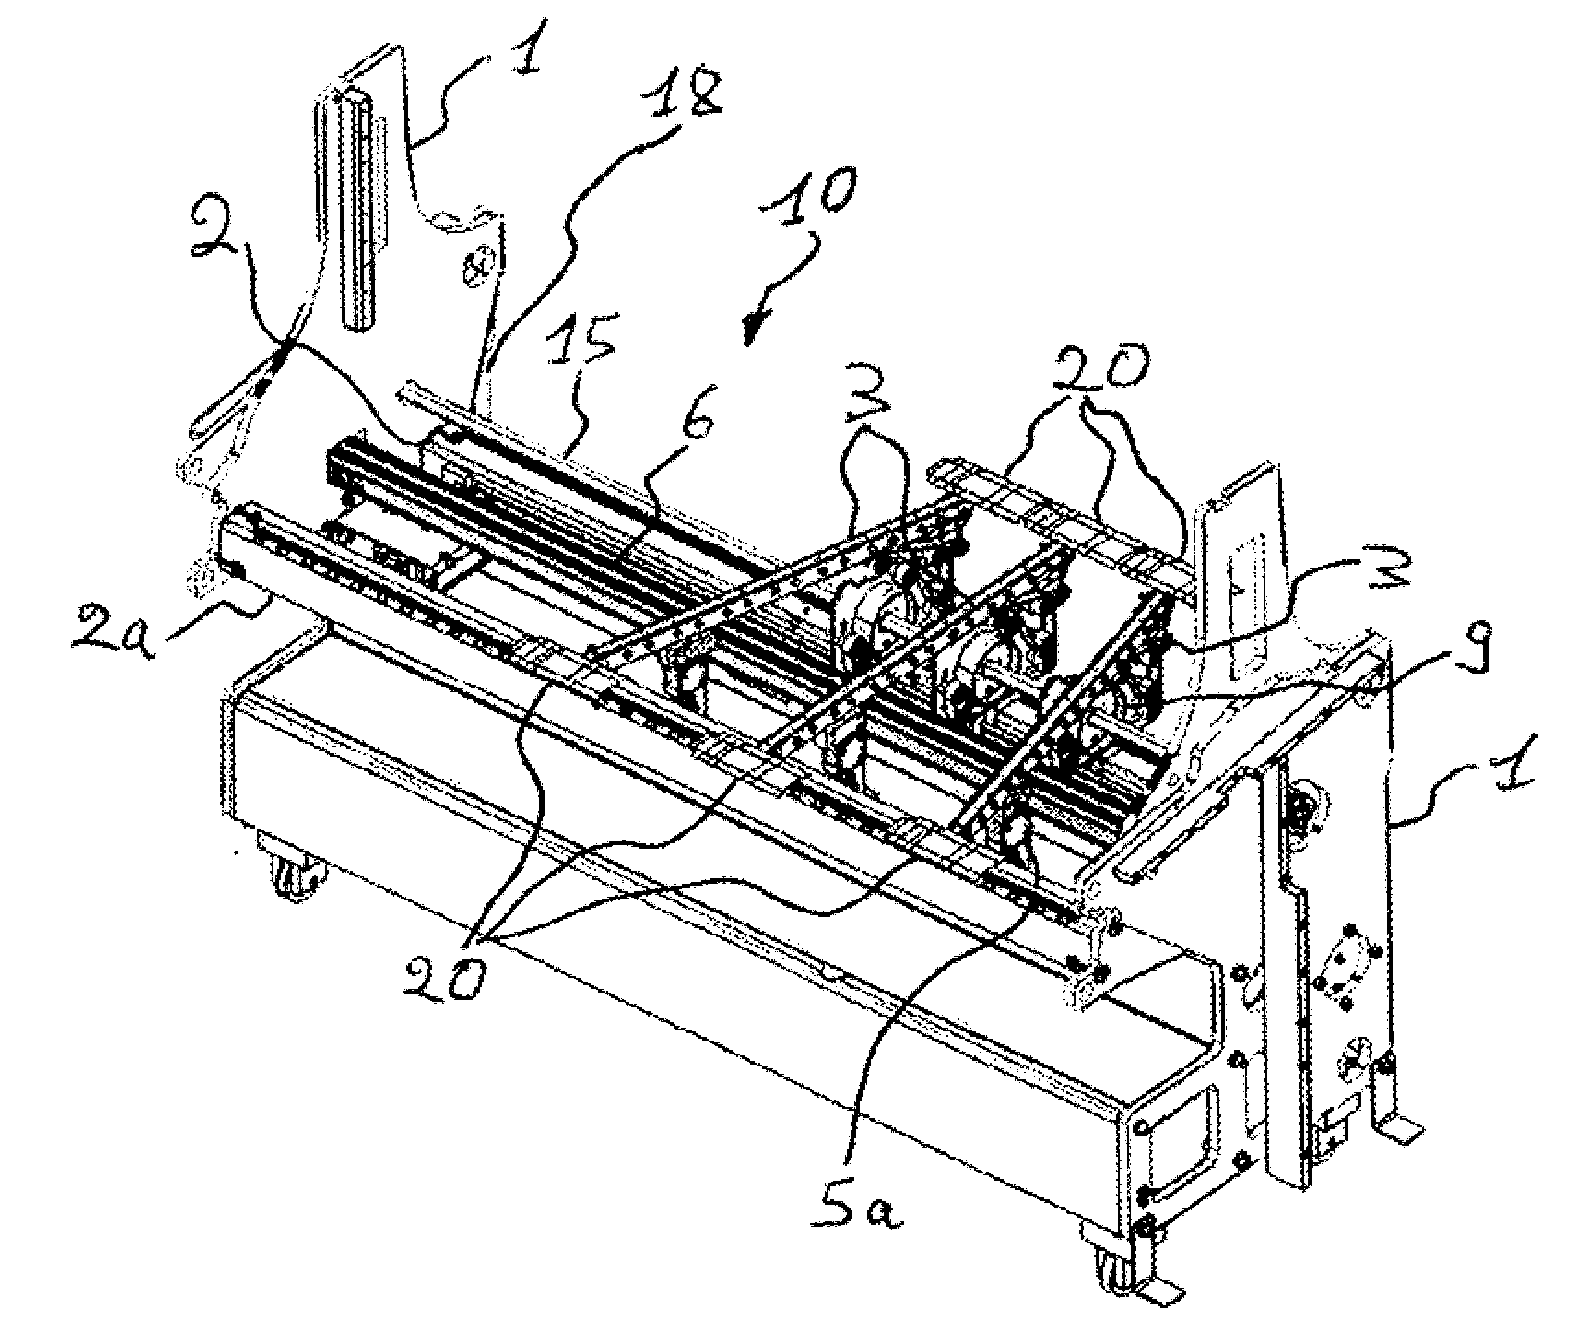 Unit for separating a pre-cut substrate positioned downstream from a cutting unit